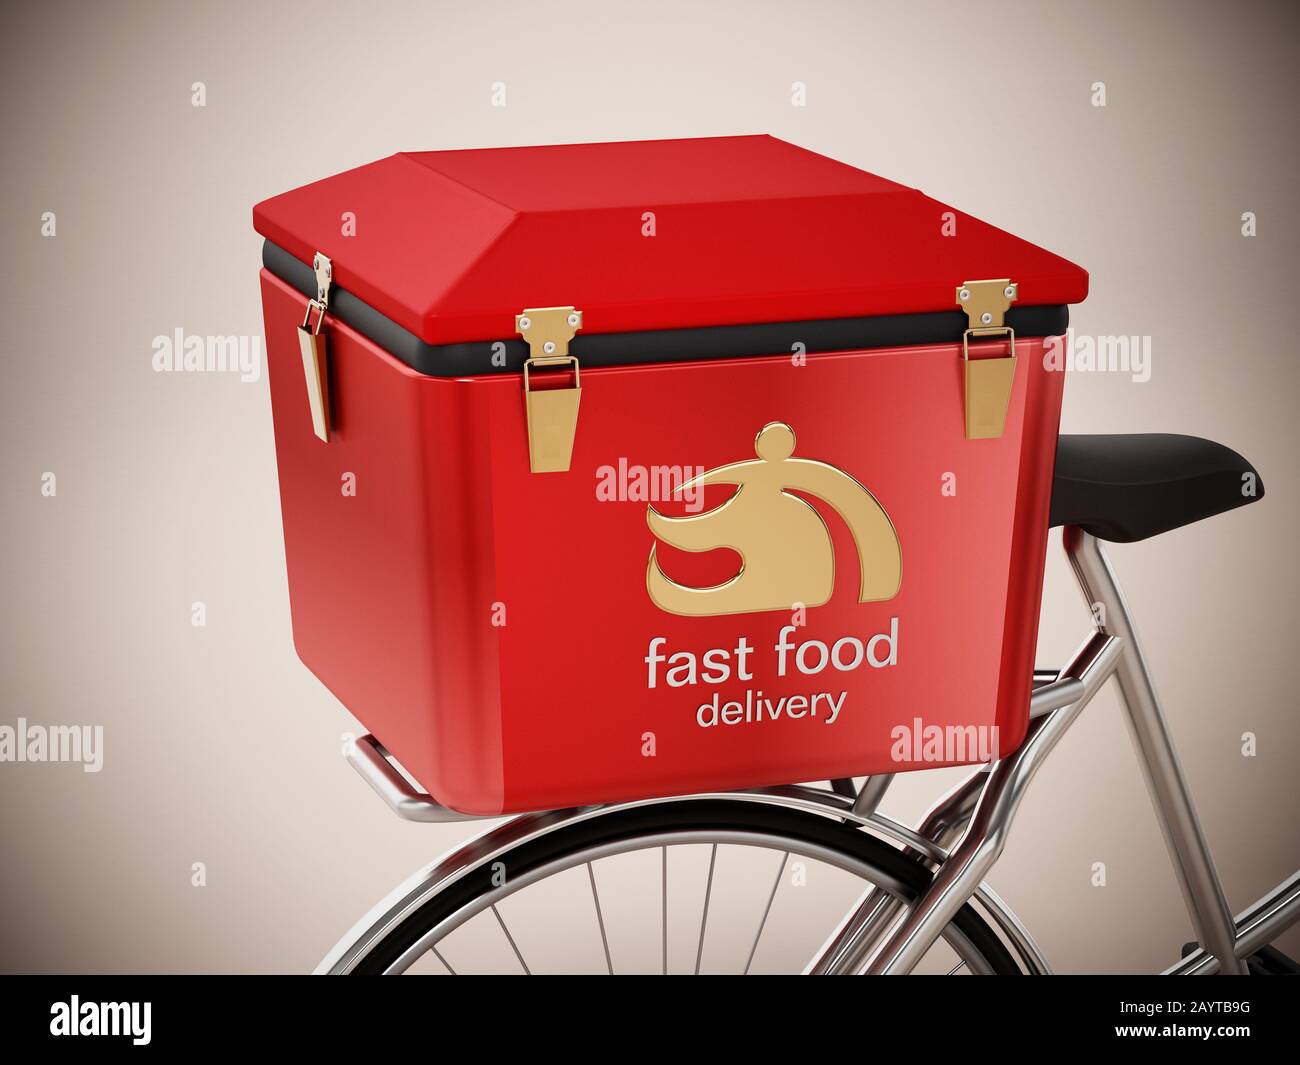 Fast food carrying box loaded on a bicycle. 3D illustration. Stock Photo